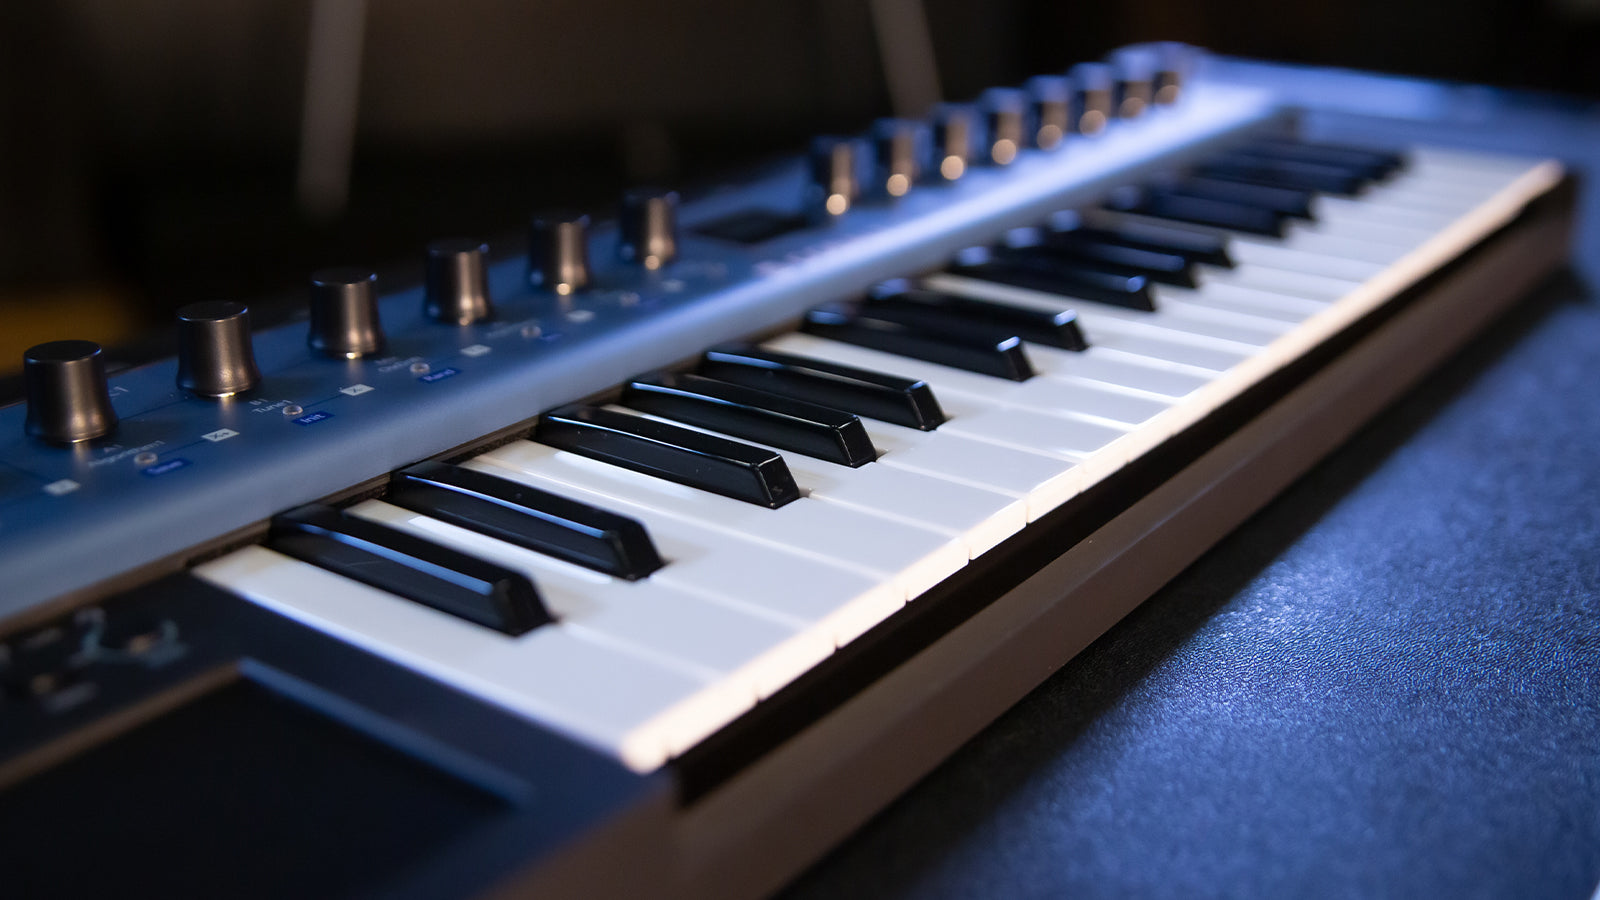 A Modal synth resting on a road case in a studio